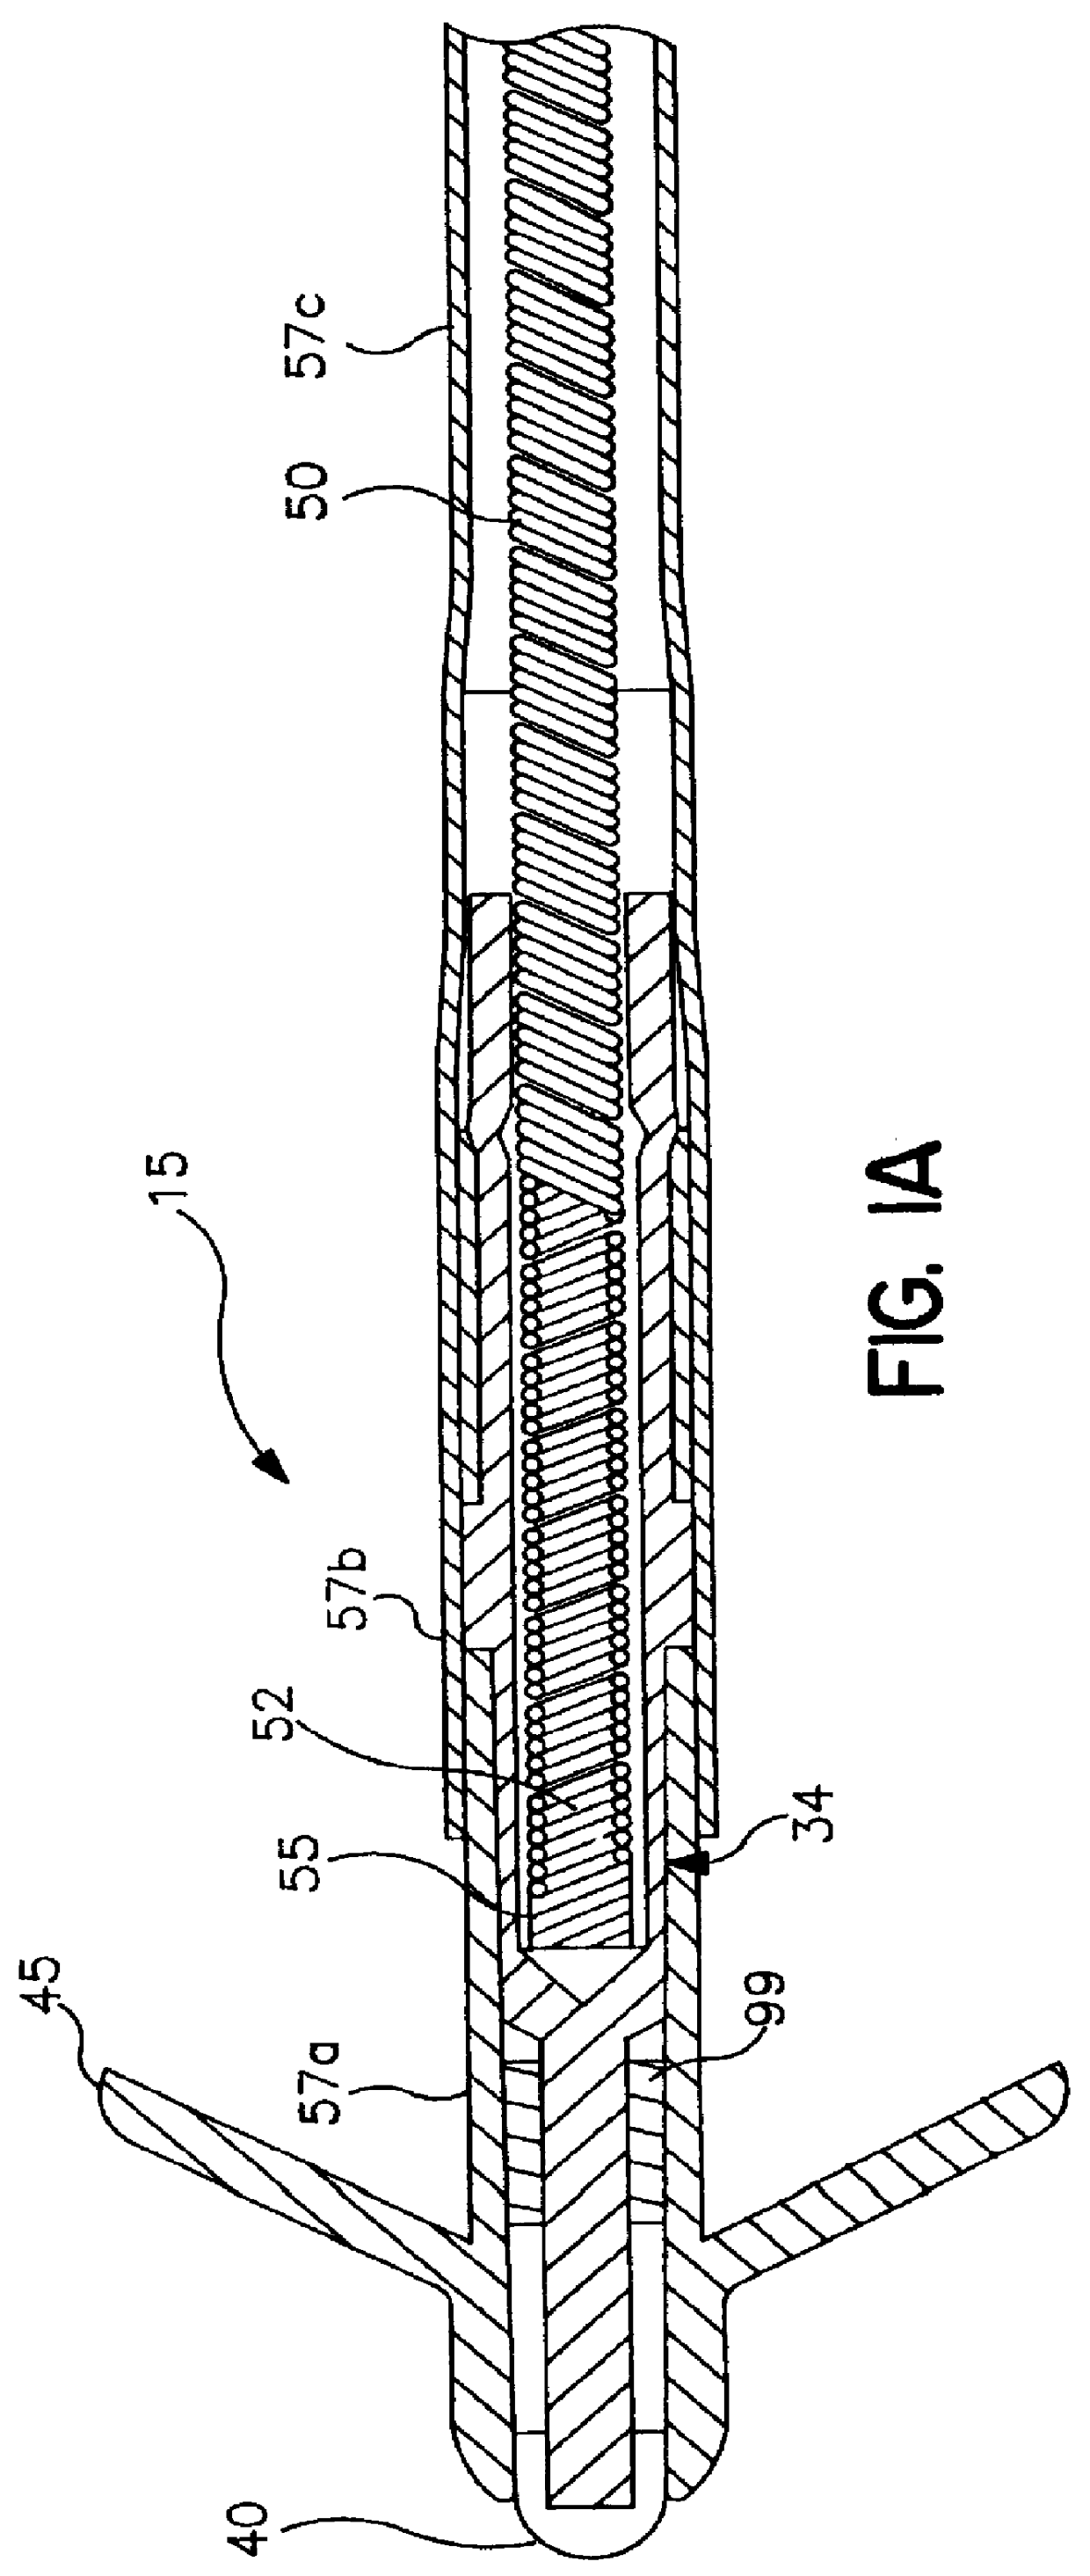 Medical electrical lead and reinforced silicone elastomer compositions used therein